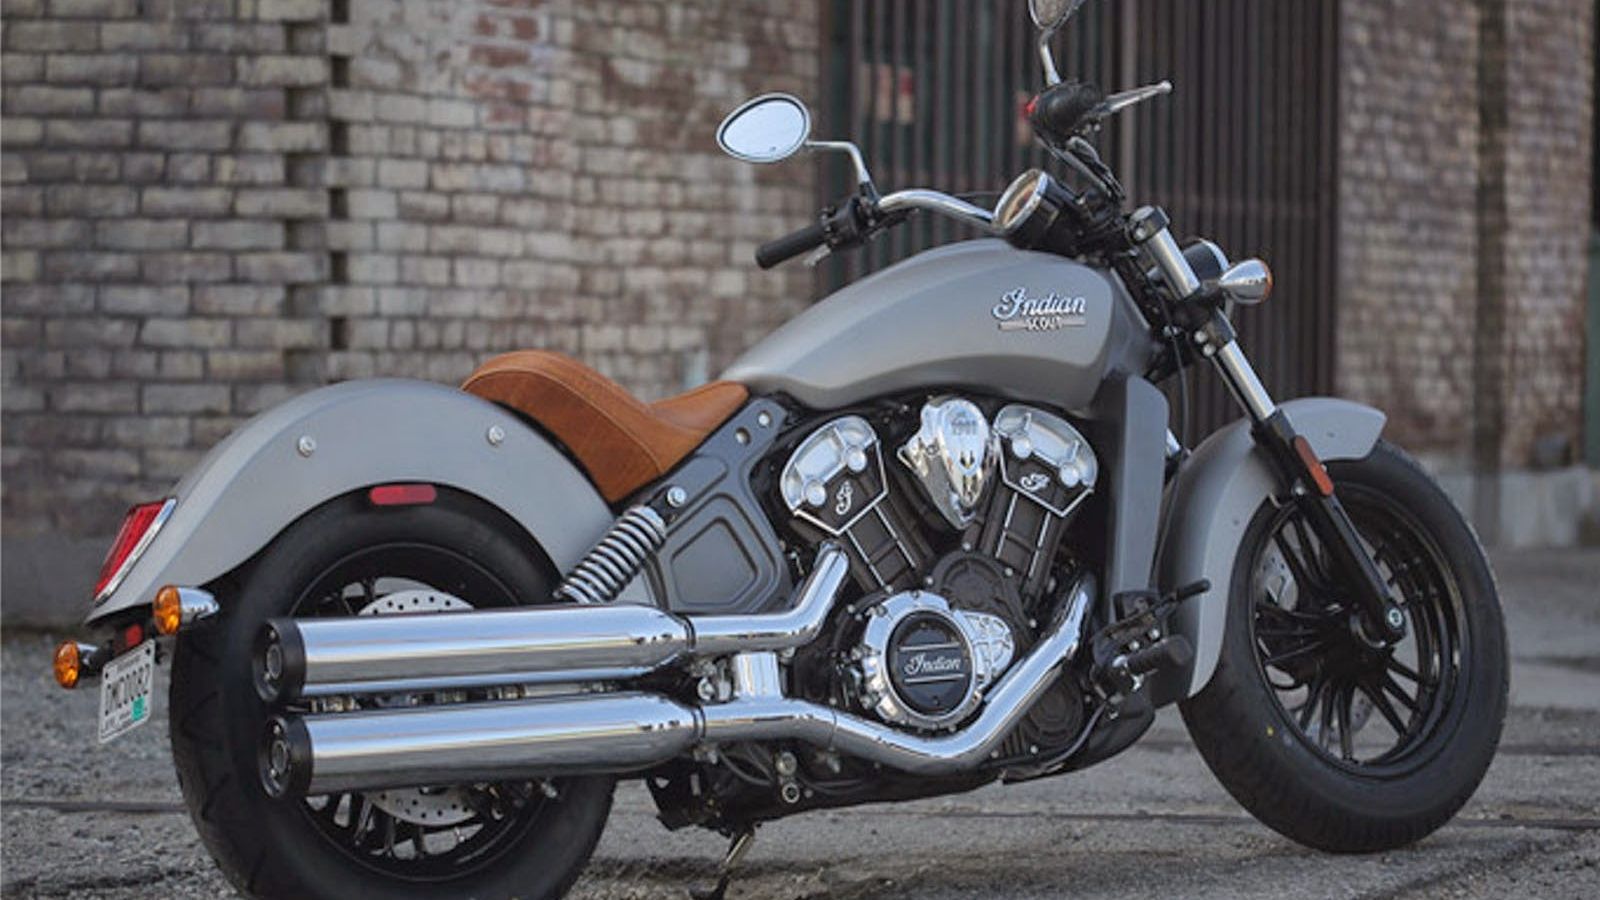 Free download indian scout 2015 wallpaper indian scout 2015